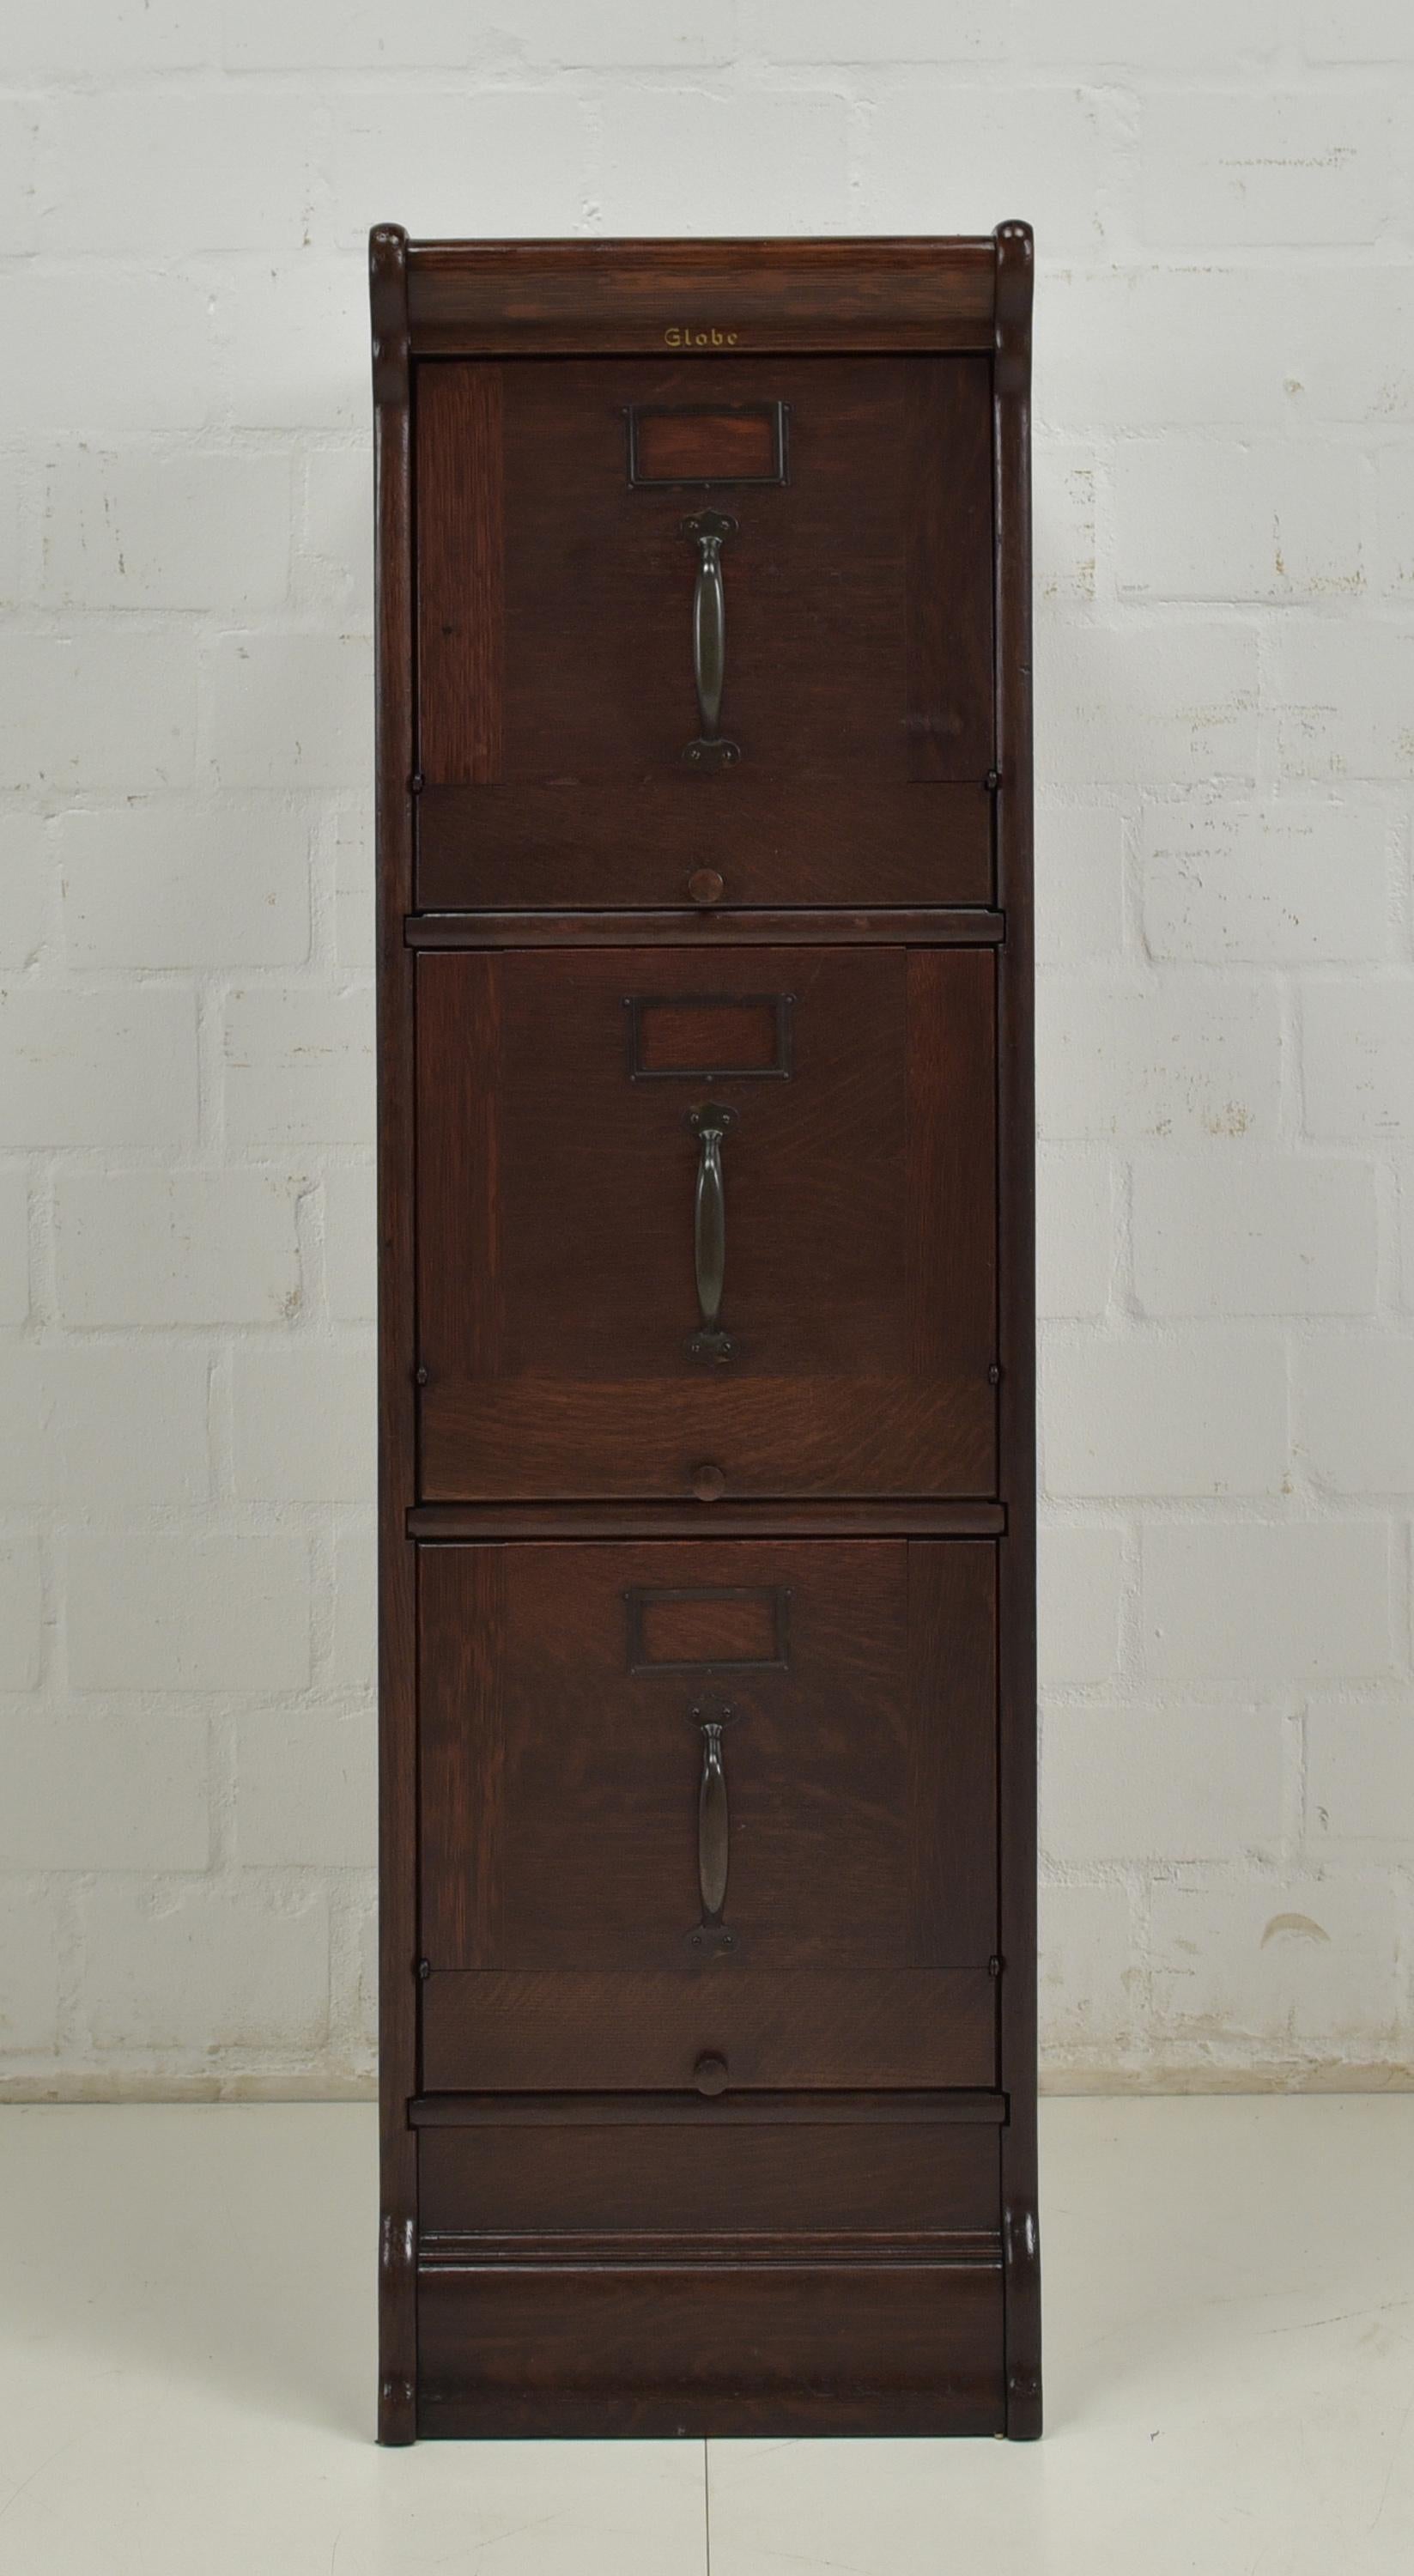 Globe Card File Cabinet in Solid Oak (Item No. J-0615)

This elegant Globe card file cabinet in solid oak is a timeless piece of furniture from the 1930s. It is in very good, ready-to-live-in restored condition and has high-quality